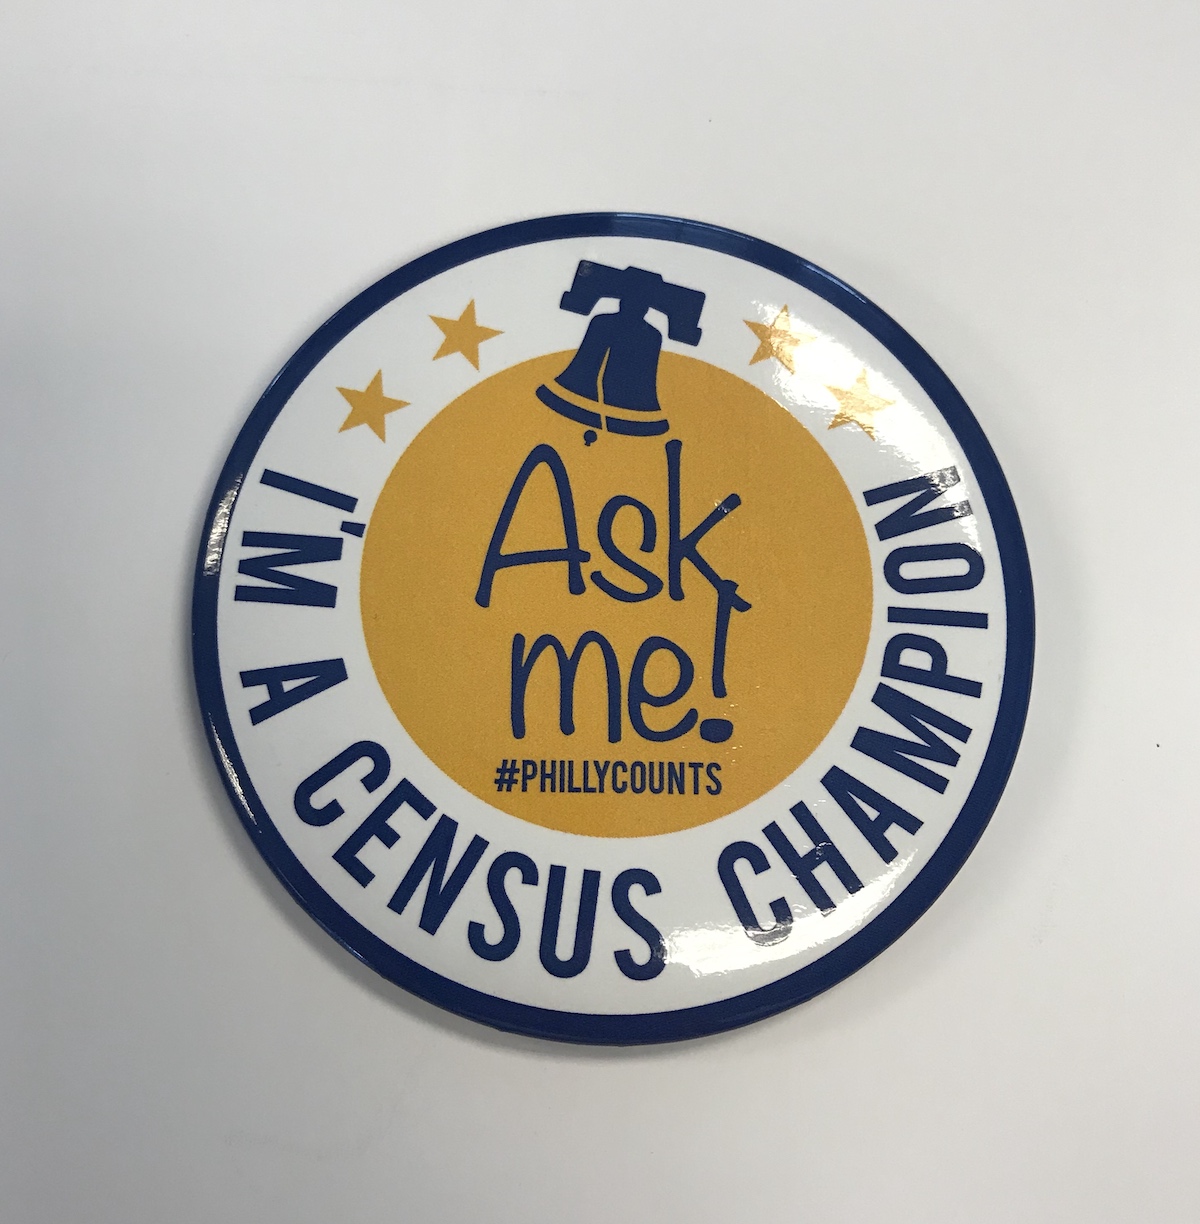 “Ask me! I’m a census champion.”